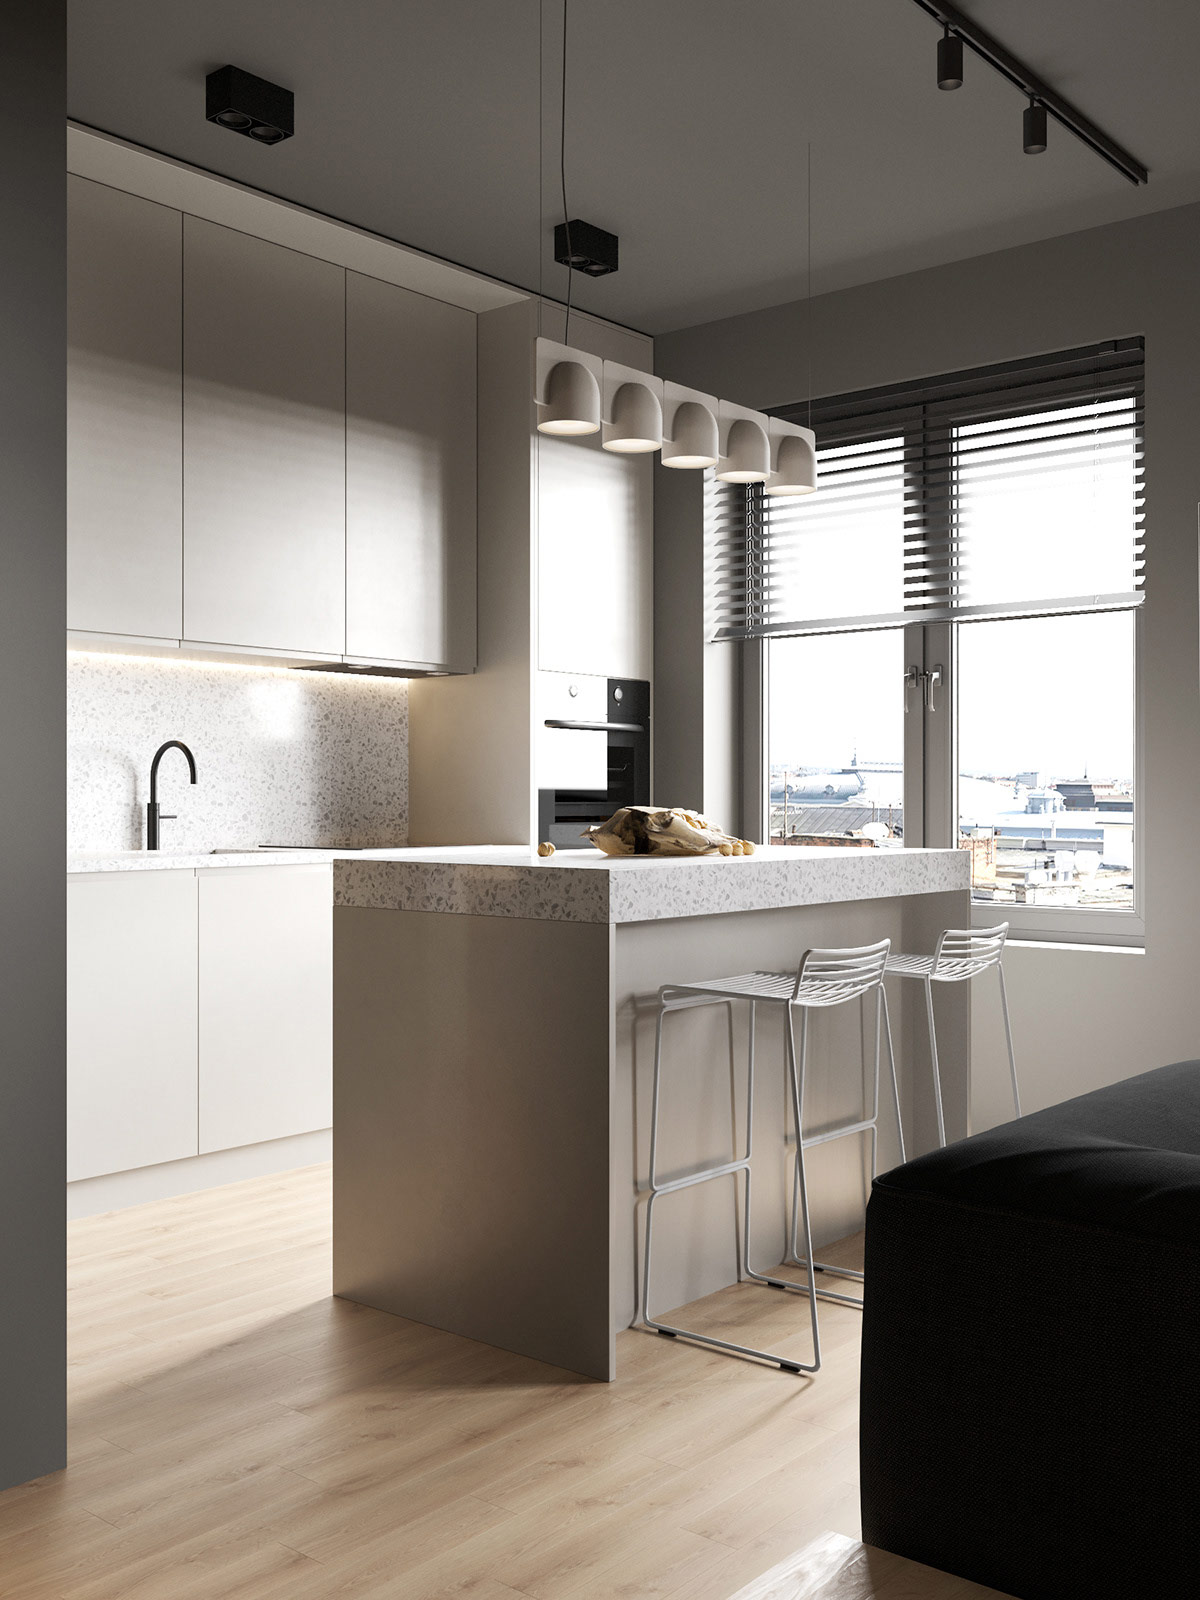 light-and-bright-apartment-kitchen-600x8